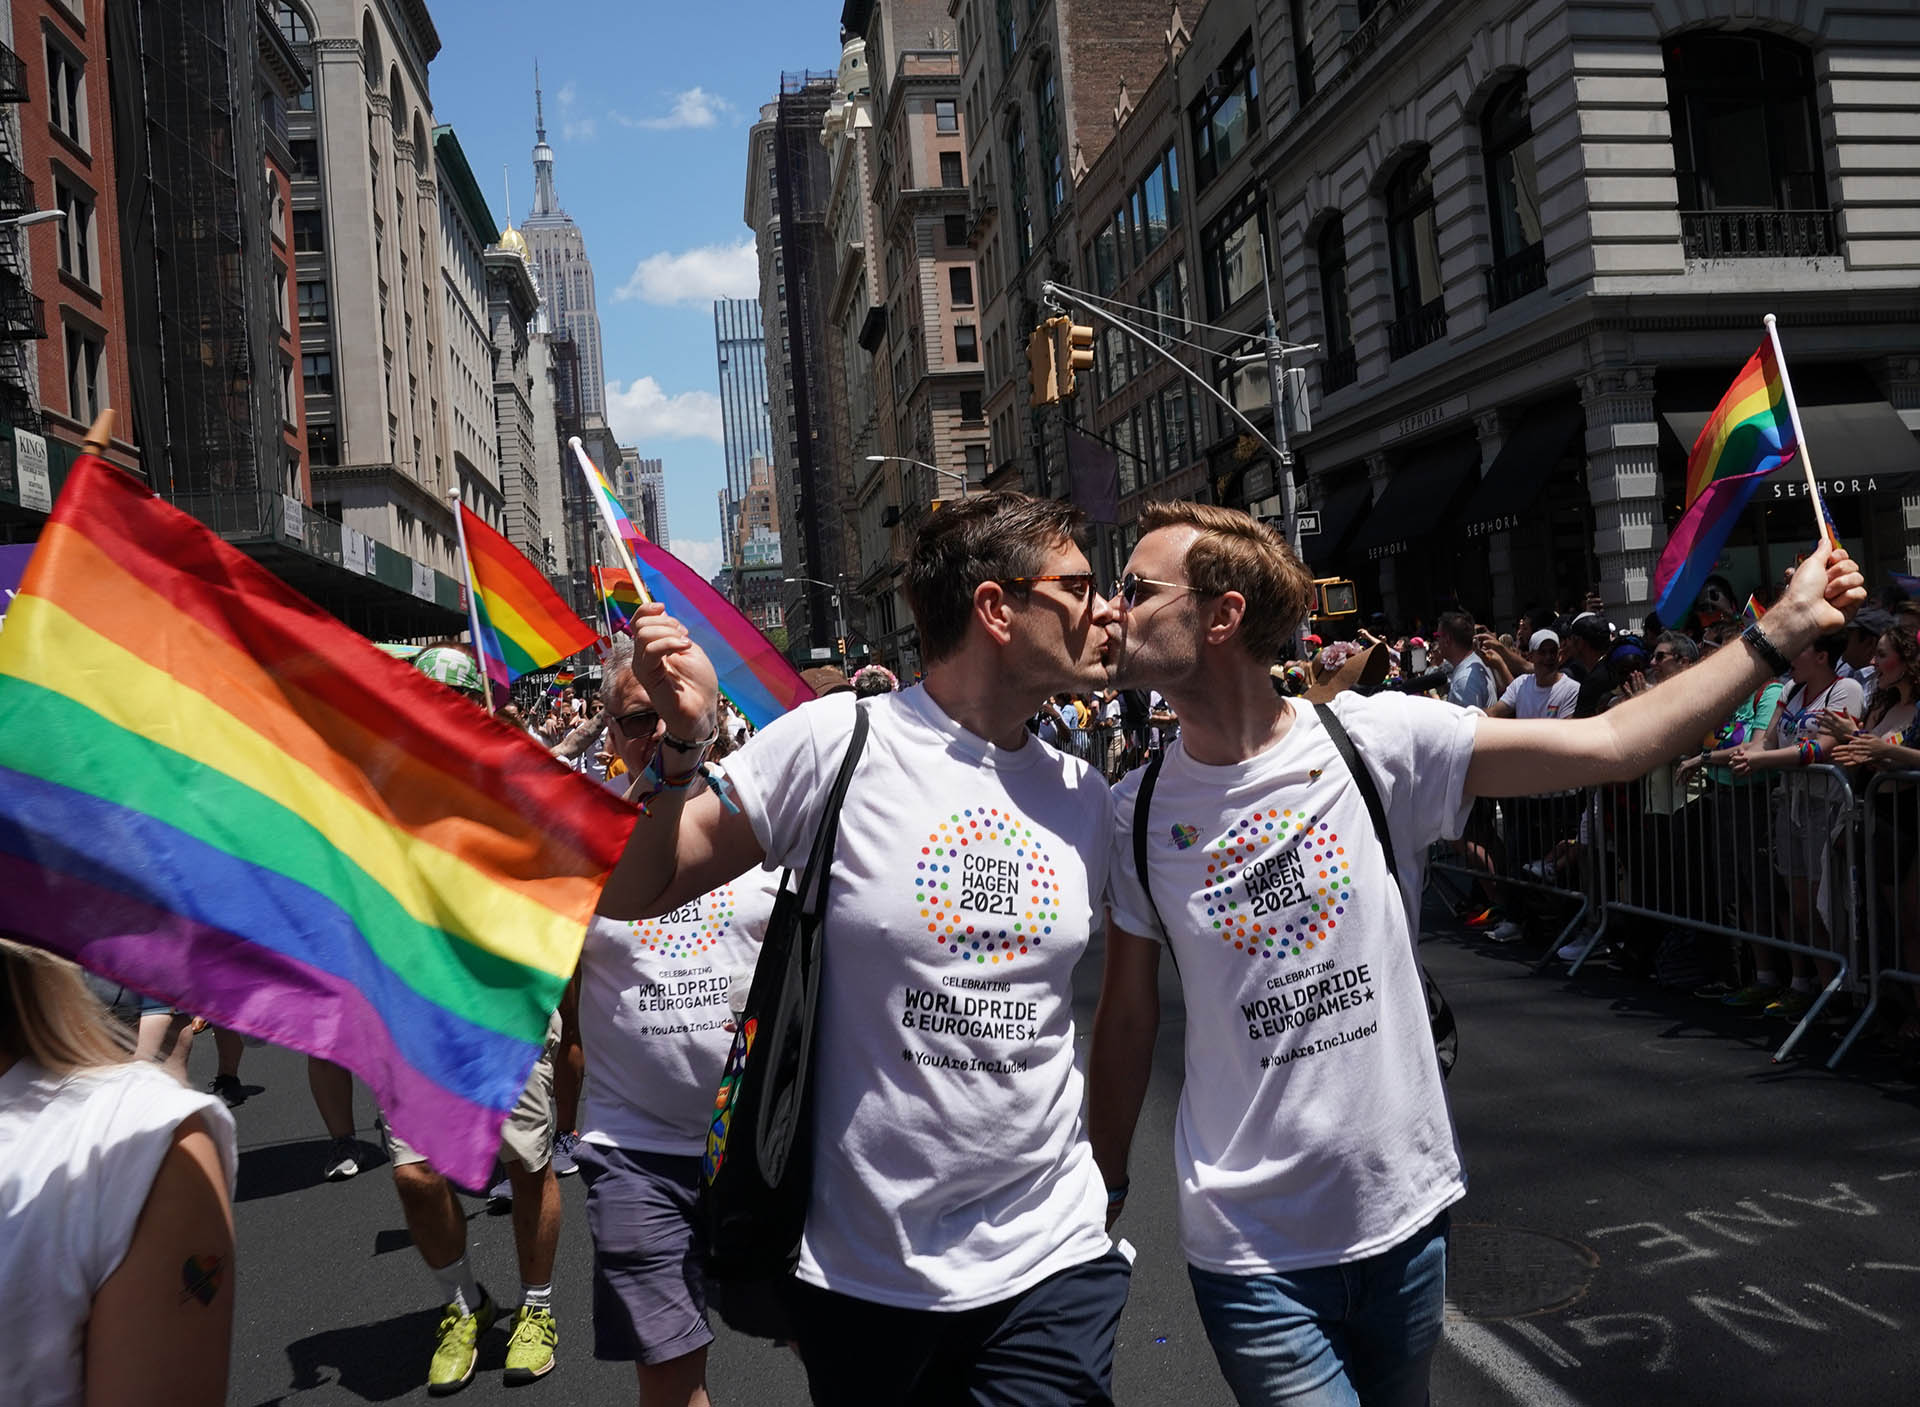 A scene from the last Pride March "face-to-face" held in New York, in 2019. (Timothy Clary / AFP)